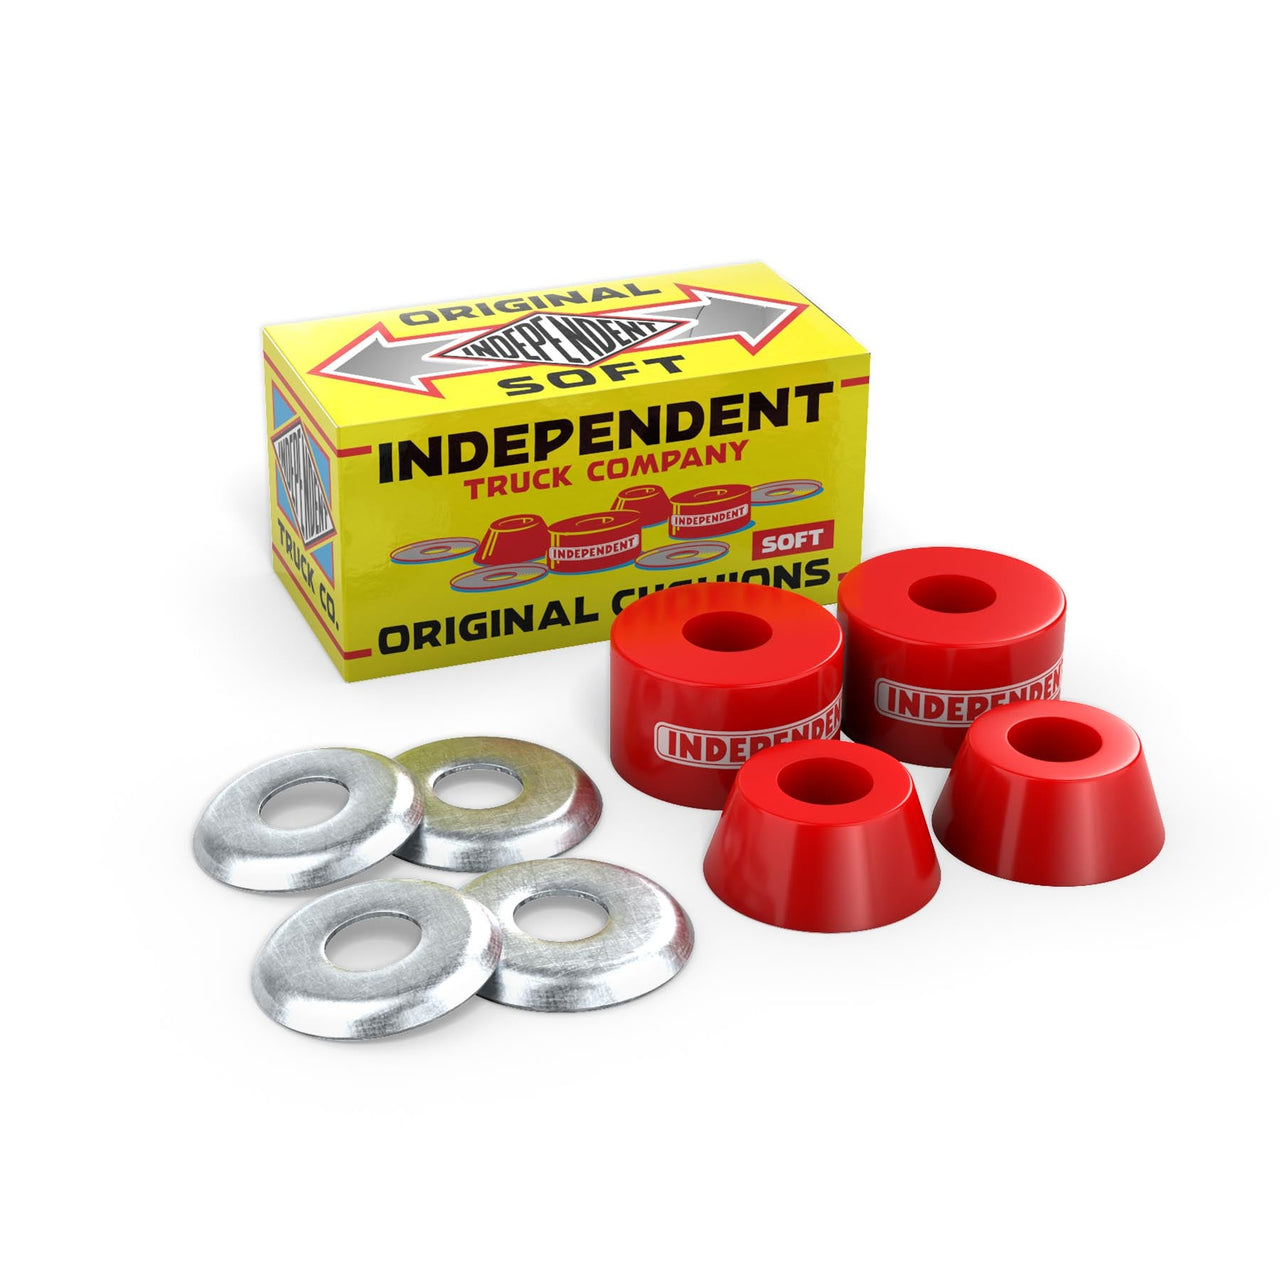 Independent Genuine Parts Original Cushions Soft 90a Bushings - Red image 1